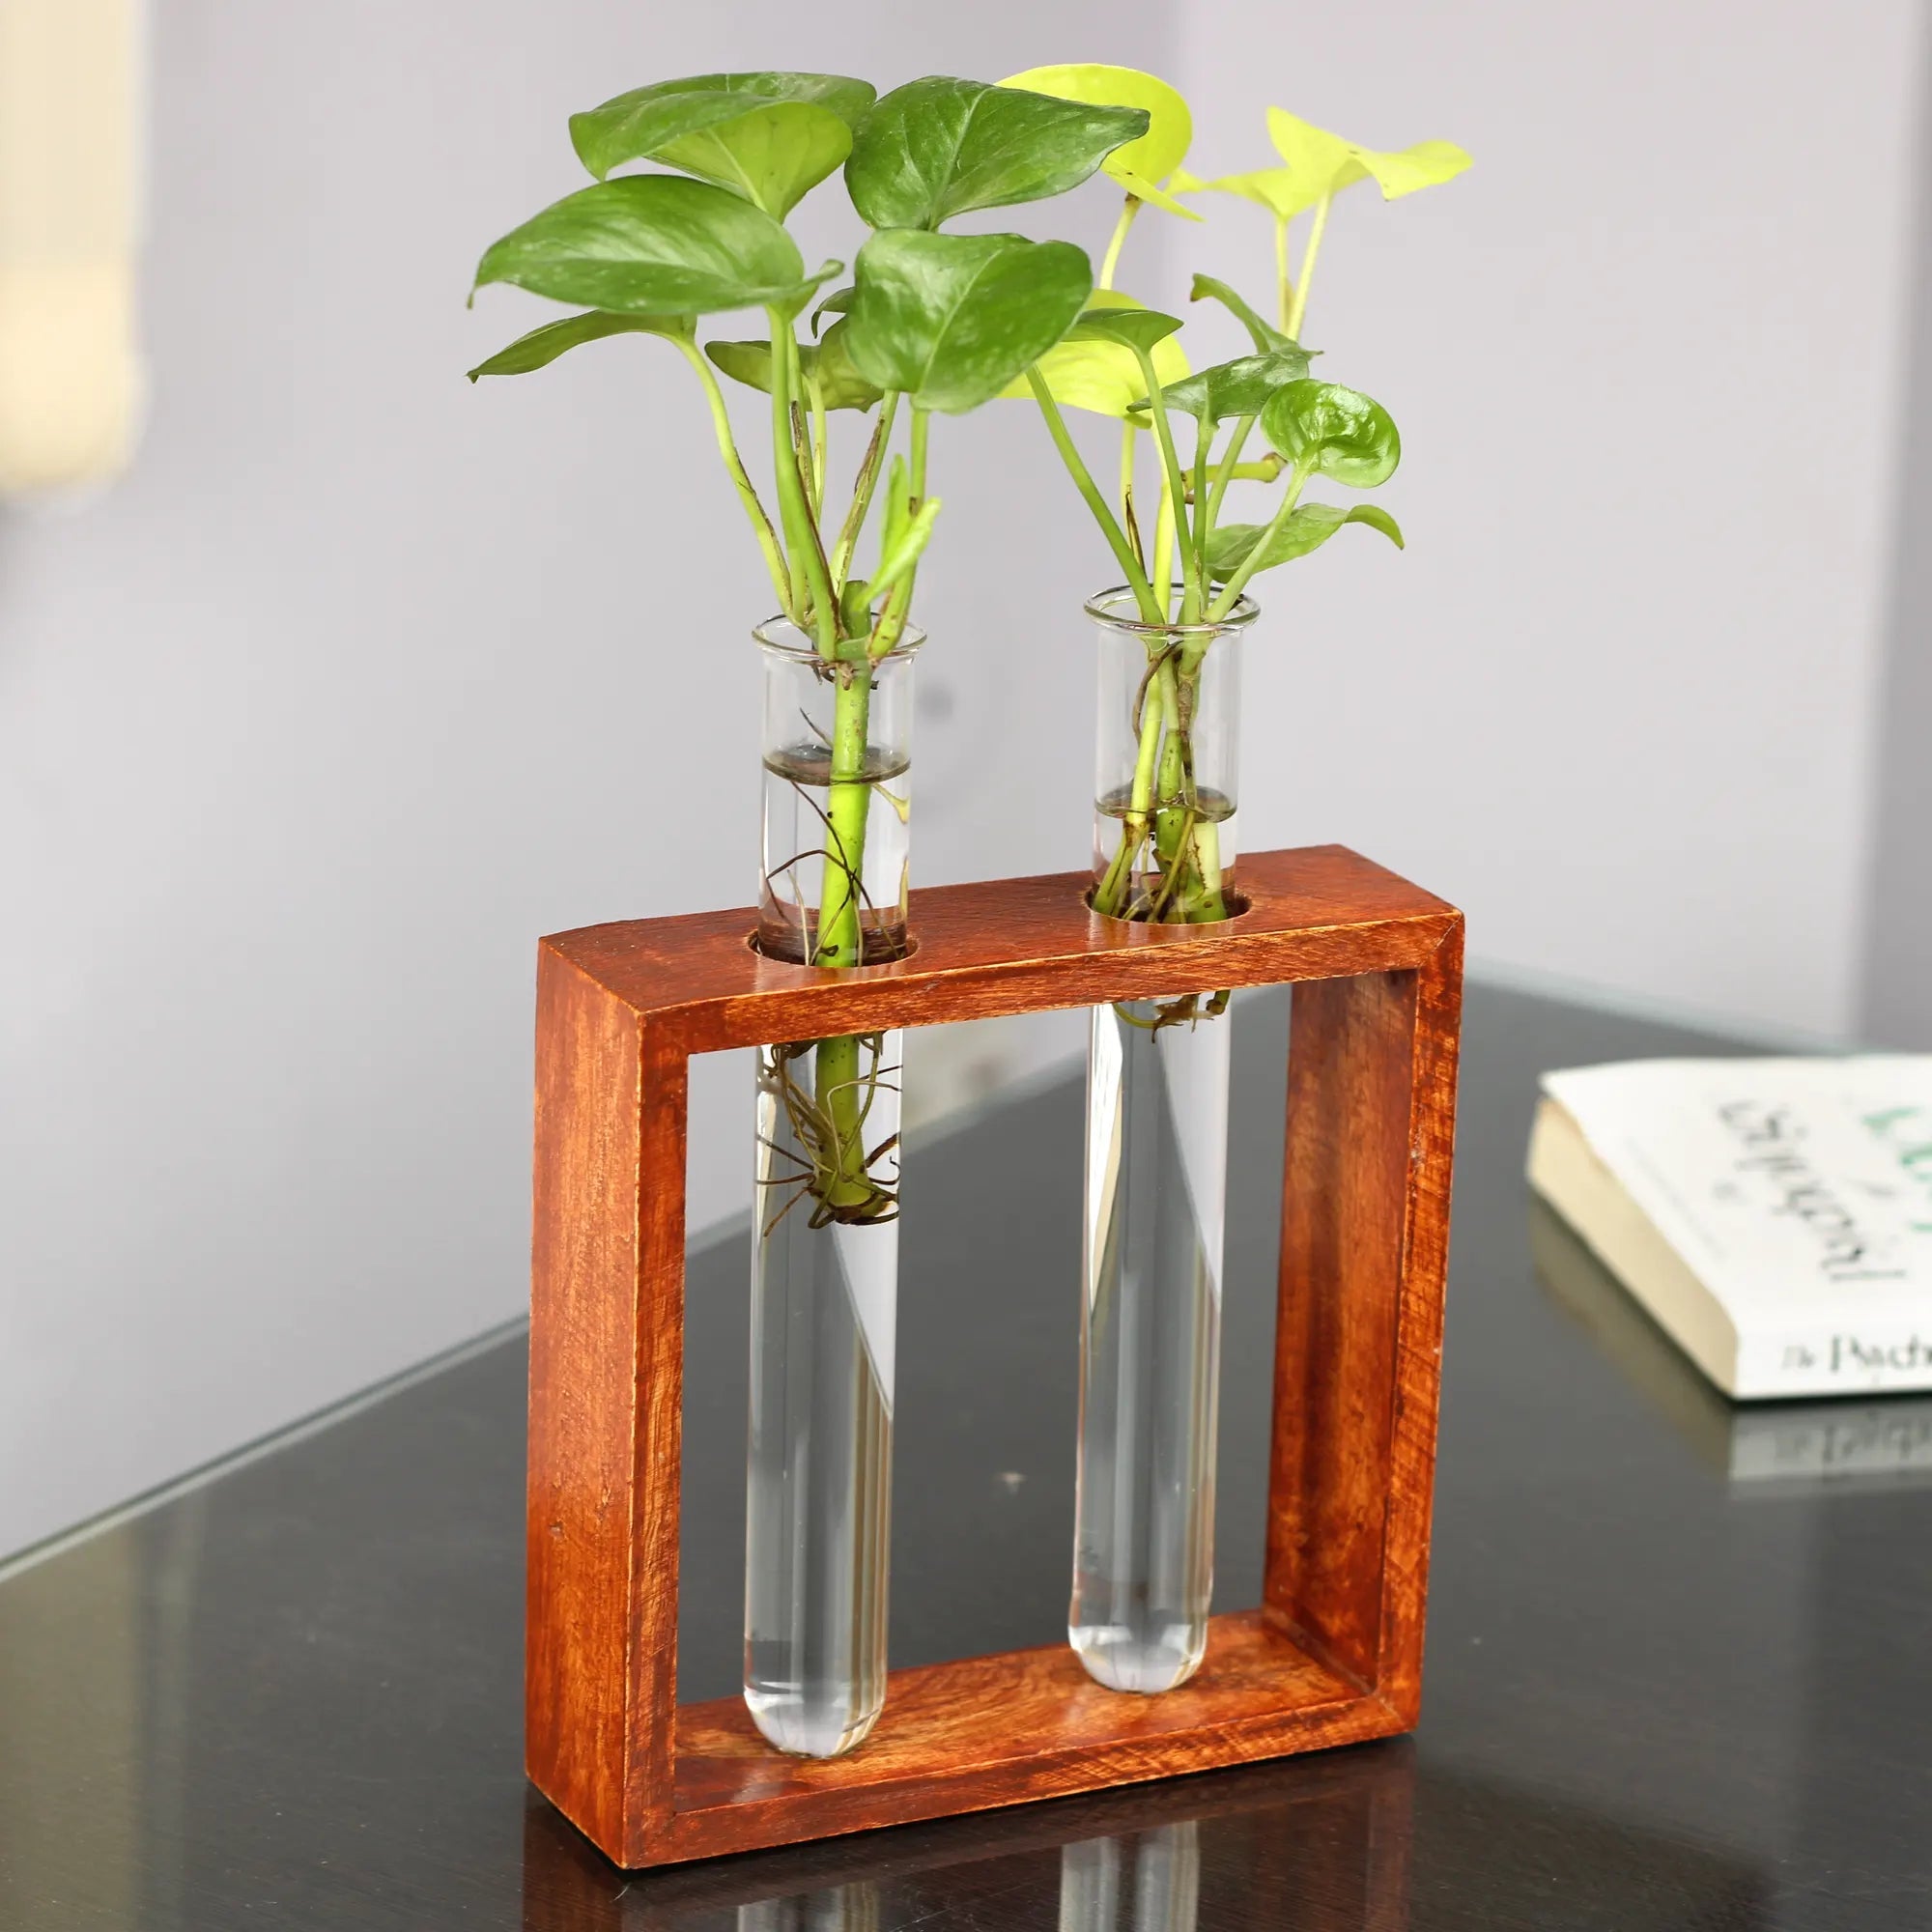 Modern Style Decorative Test Tube Planters with Wooden Frame Online (Set of 2) Indoor/Table Top Planter Urban Plant 